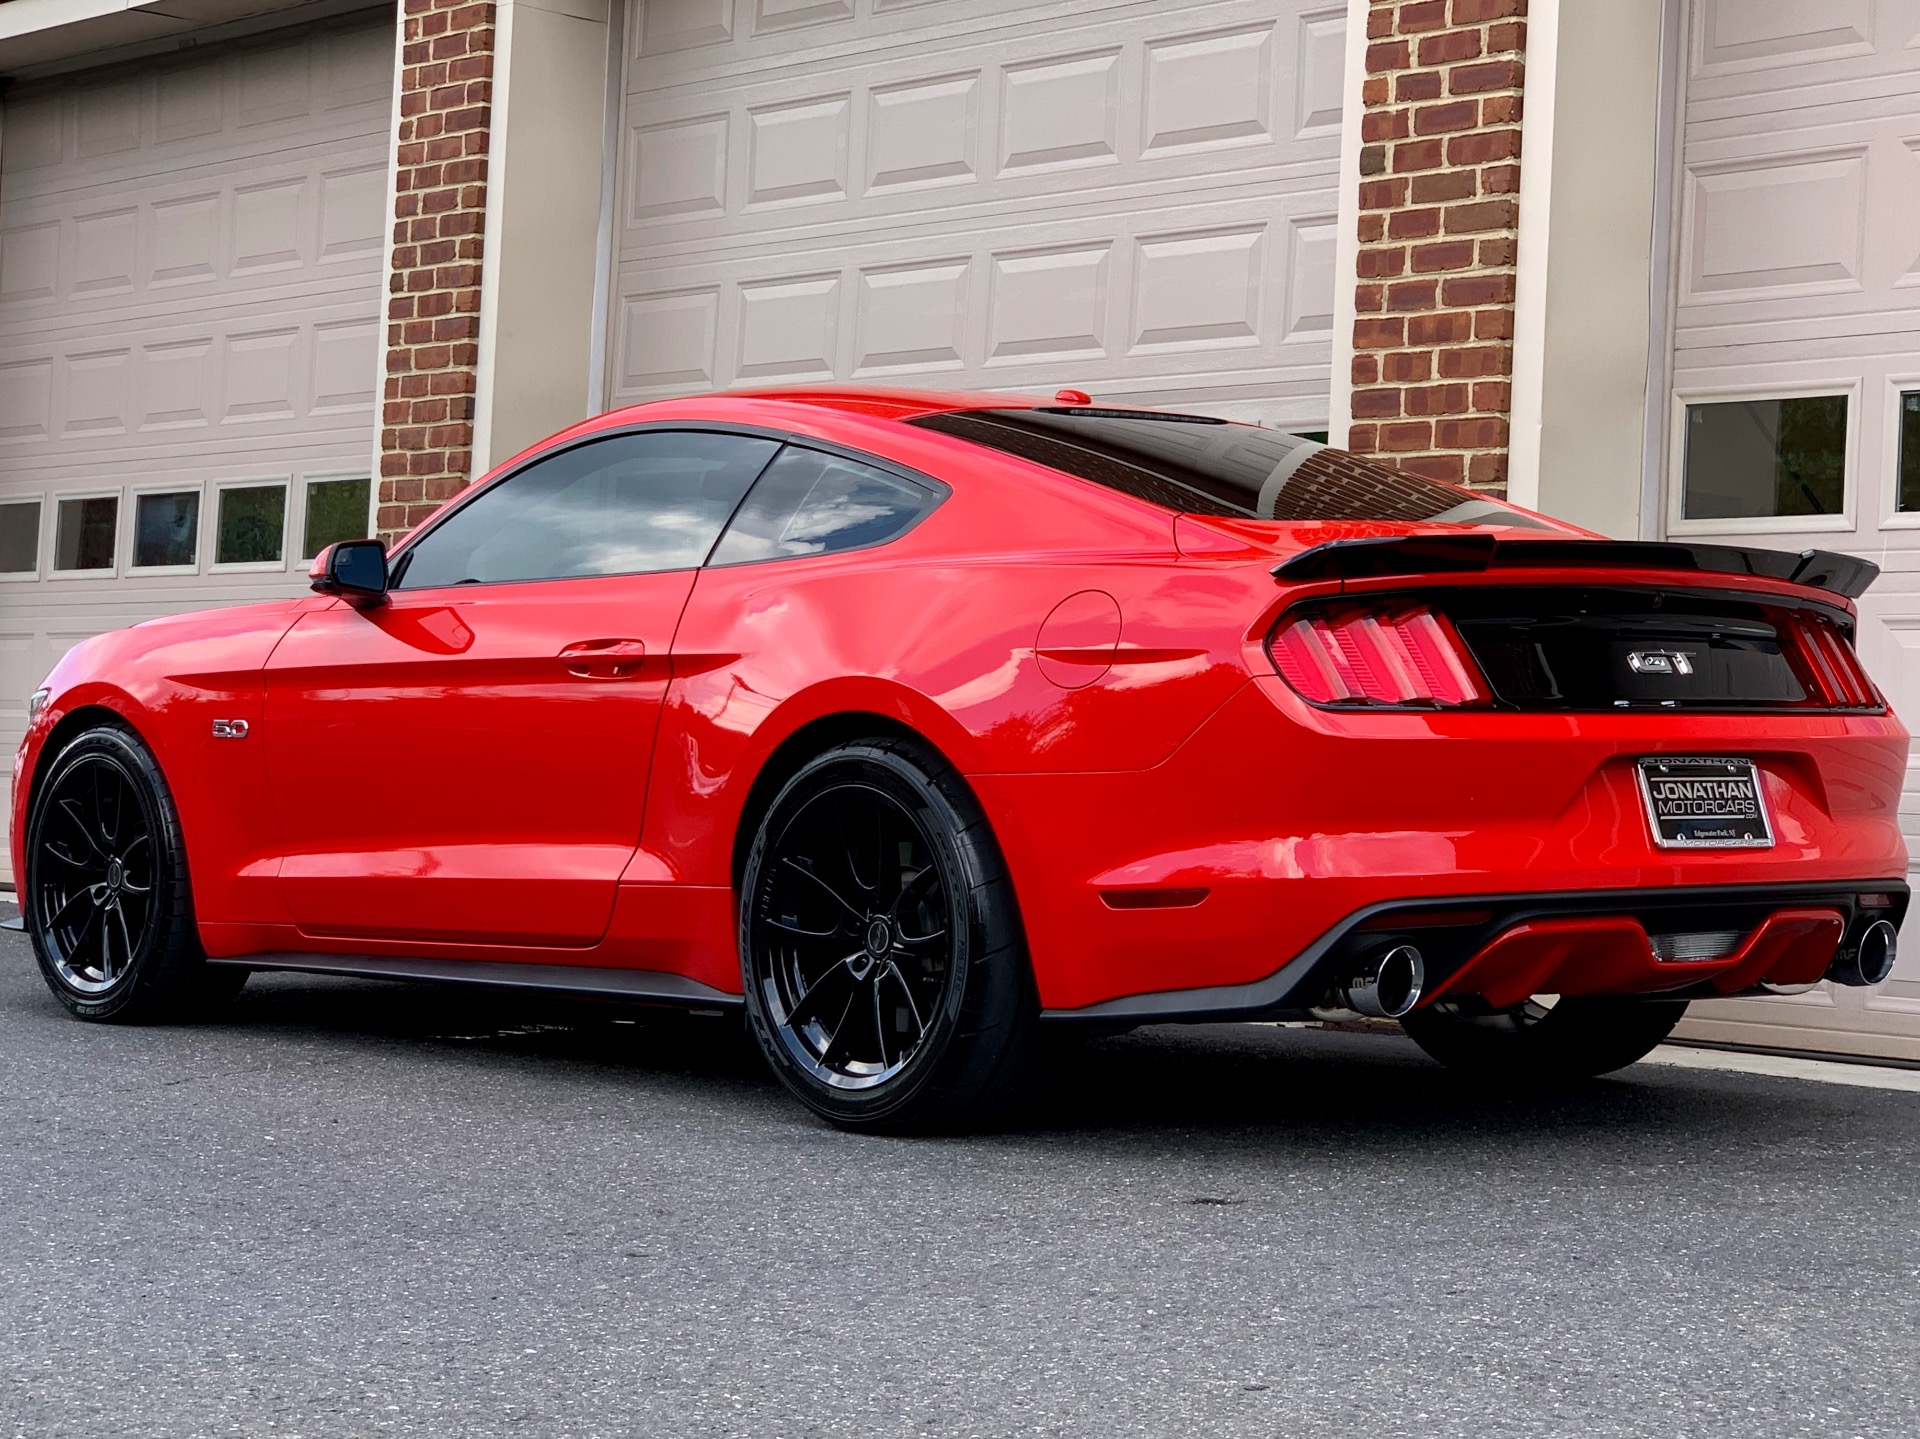 Ford Mustang GT Premium SUPERCHARGED Stock # 286518 for near Edgewater Park, NJ NJ Ford Dealer